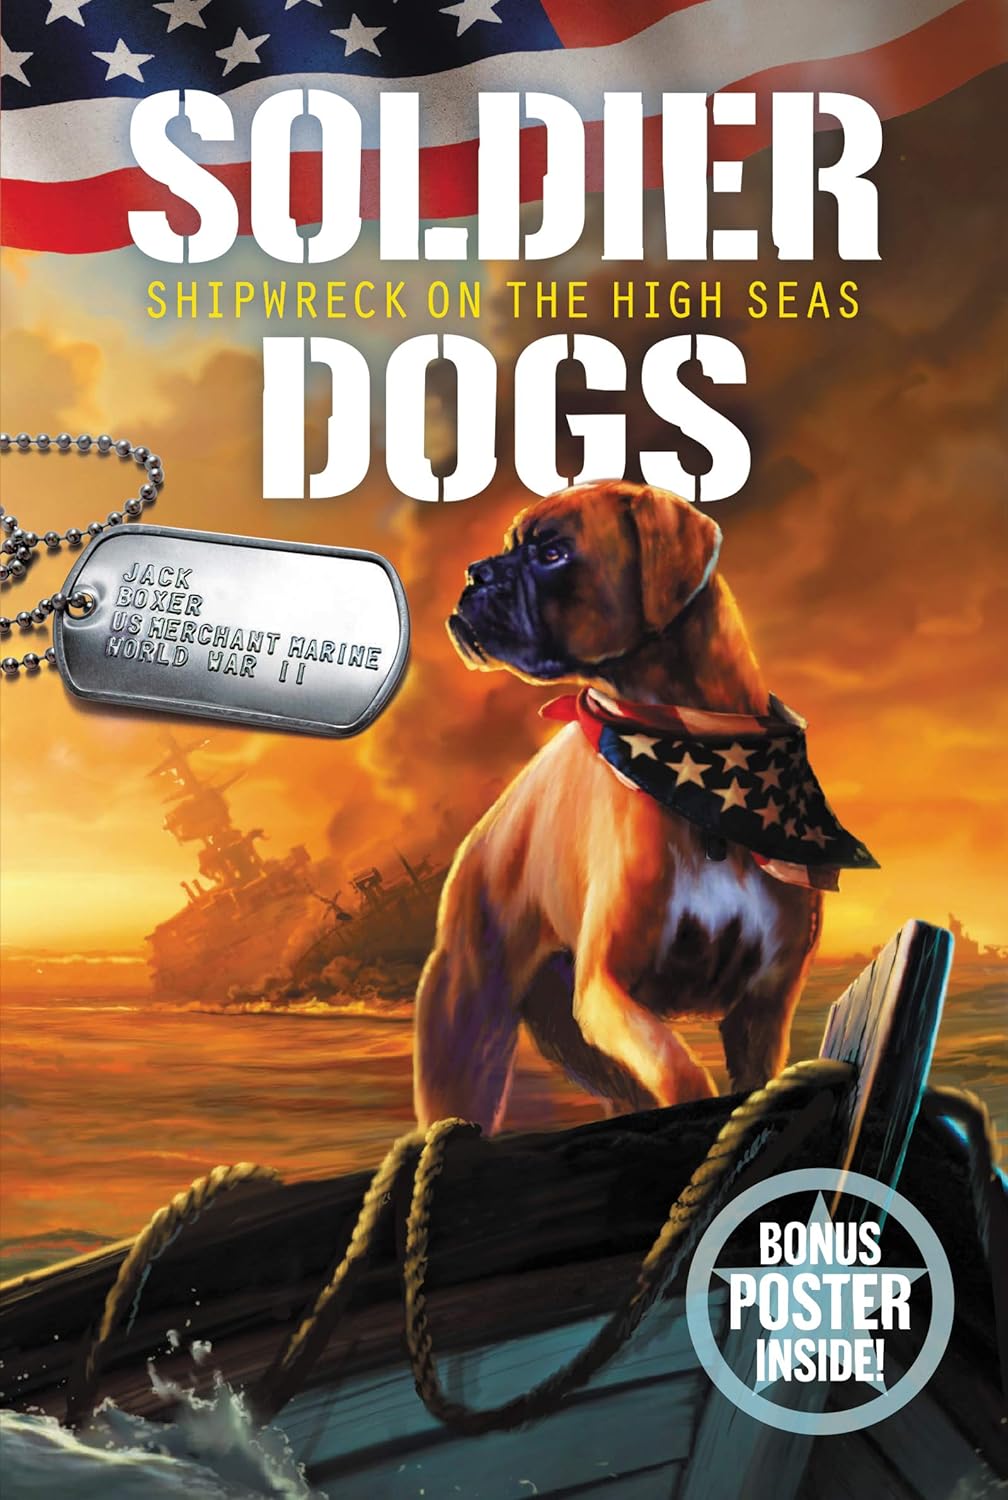 Soldier Dogs #7 Shipwreck on the High Seas